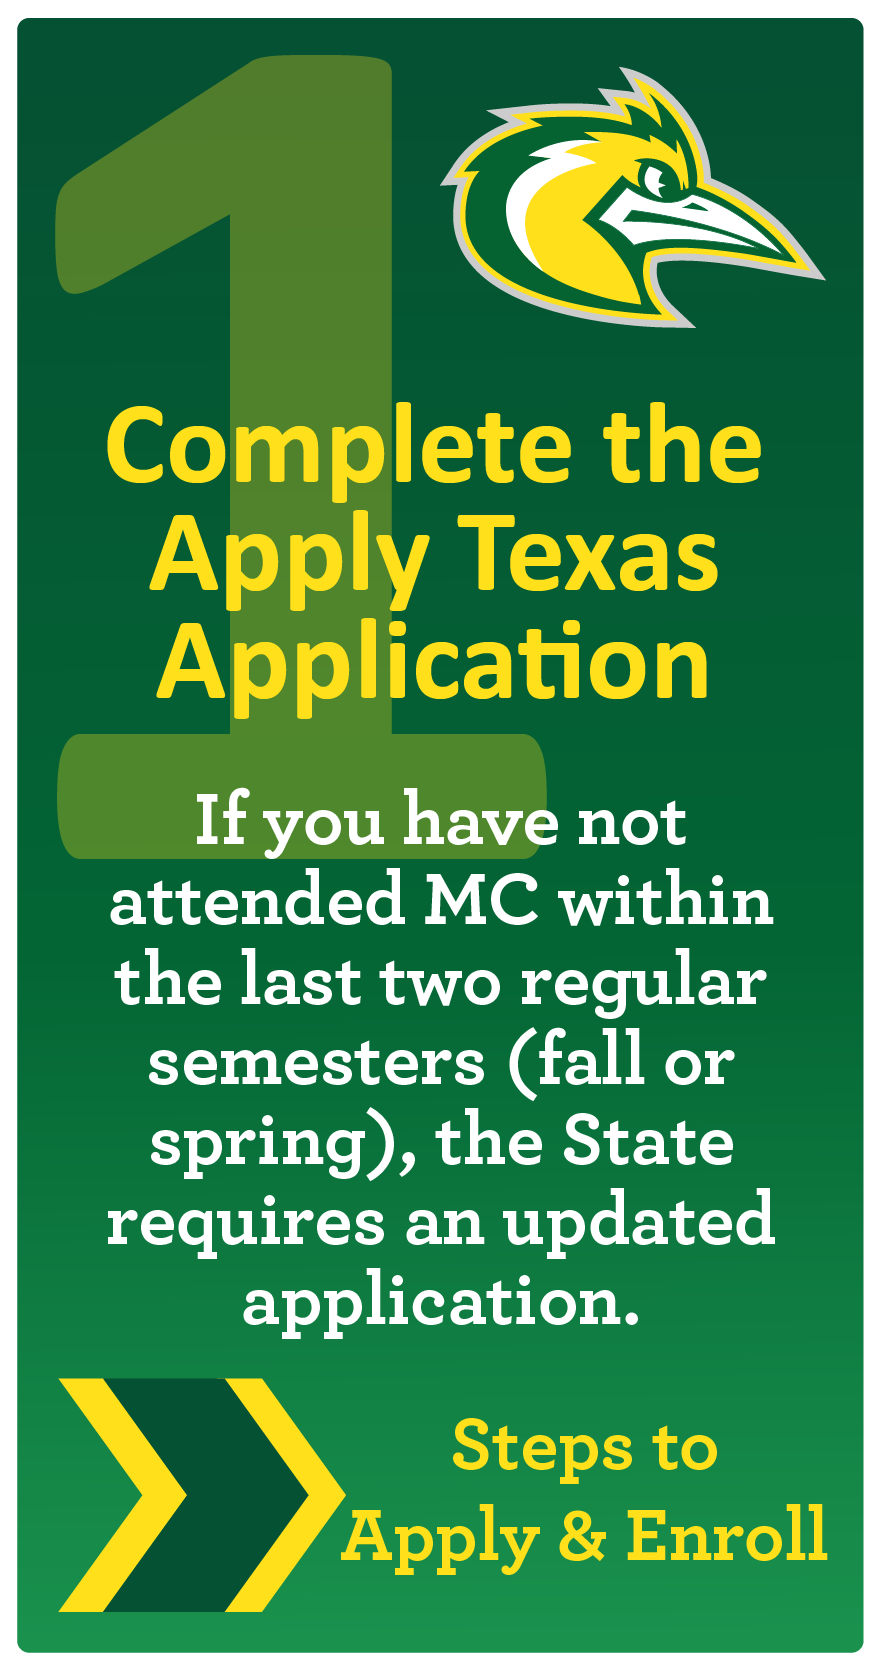 Complete the Apply Texas Application